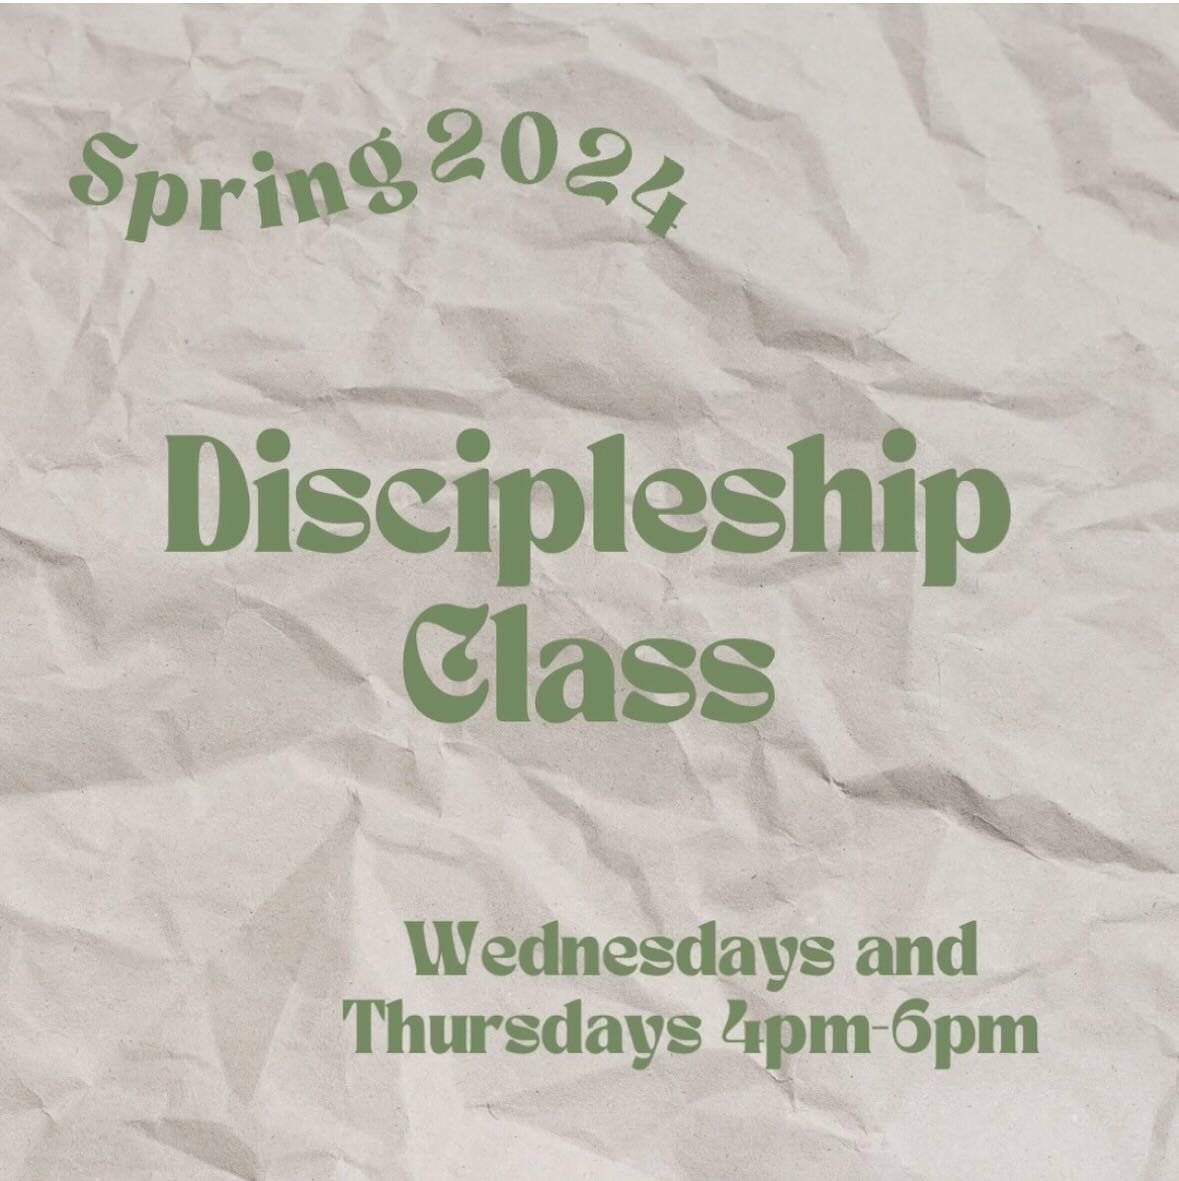 Discipleship class starts today for spring quarter! 🥳

What is Jesus up to in the world? How can we be a part of it? How can we help others experience it too? Come to this class to learn about the epic scope of the mission of God in the world - whet